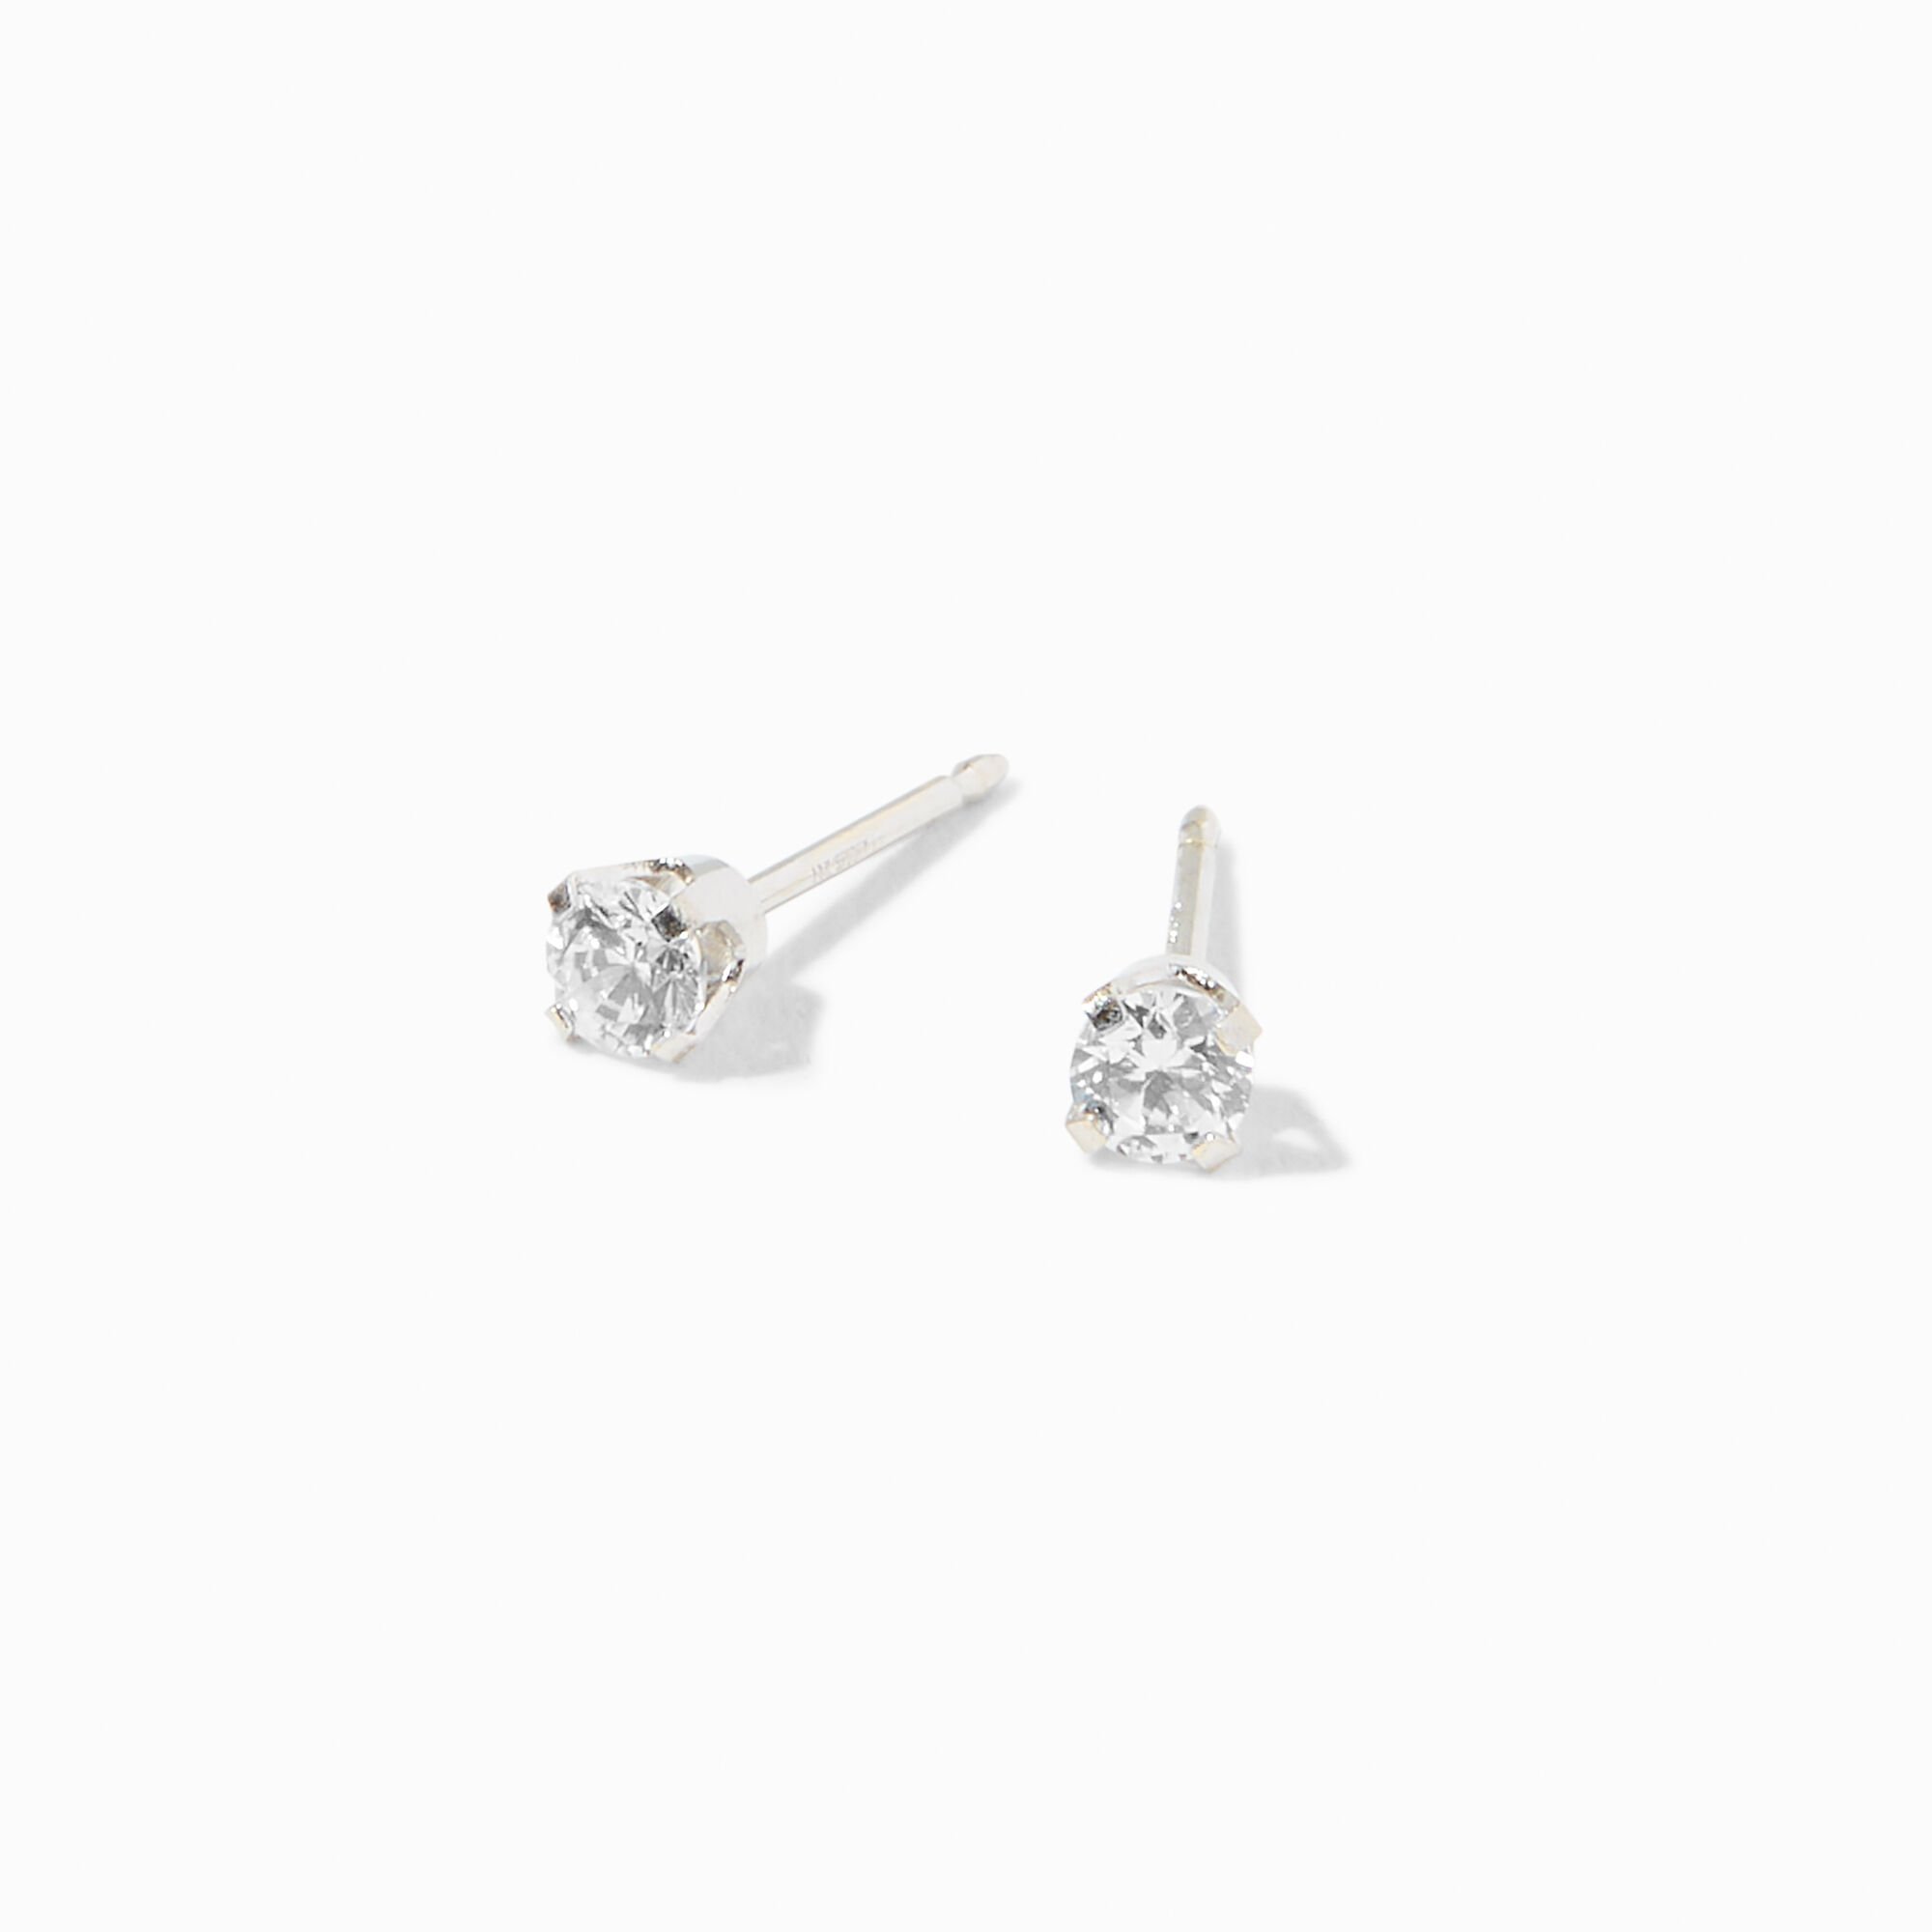 claire's exclusive platinum 3mm cubic zirconia ear piercing kit with after care lotion